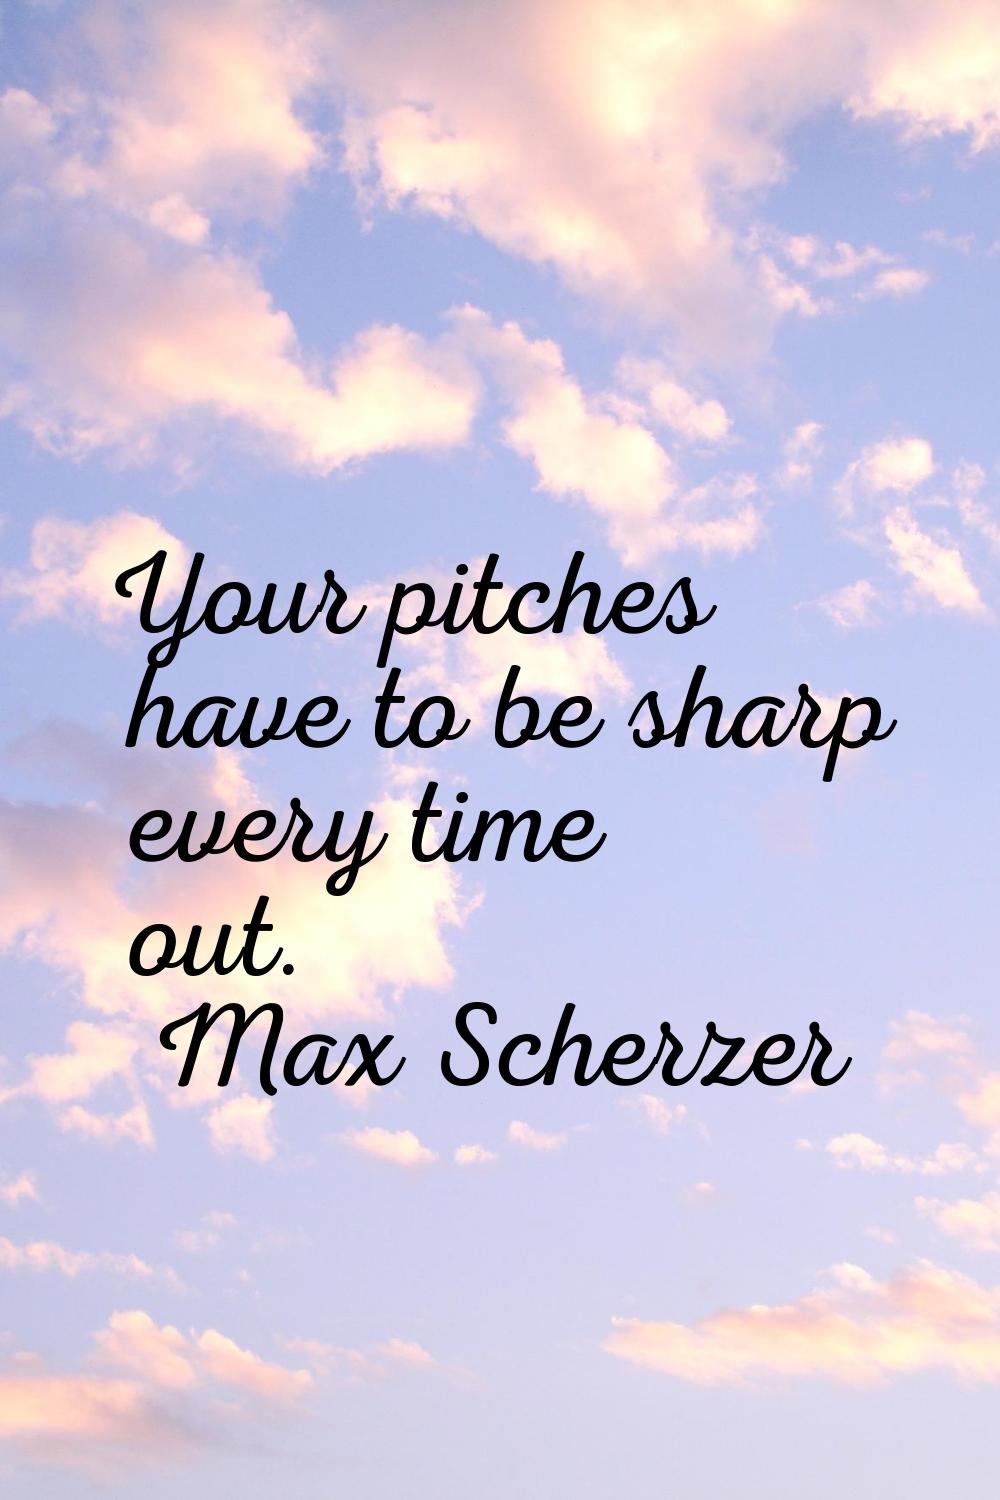 Your pitches have to be sharp every time out.